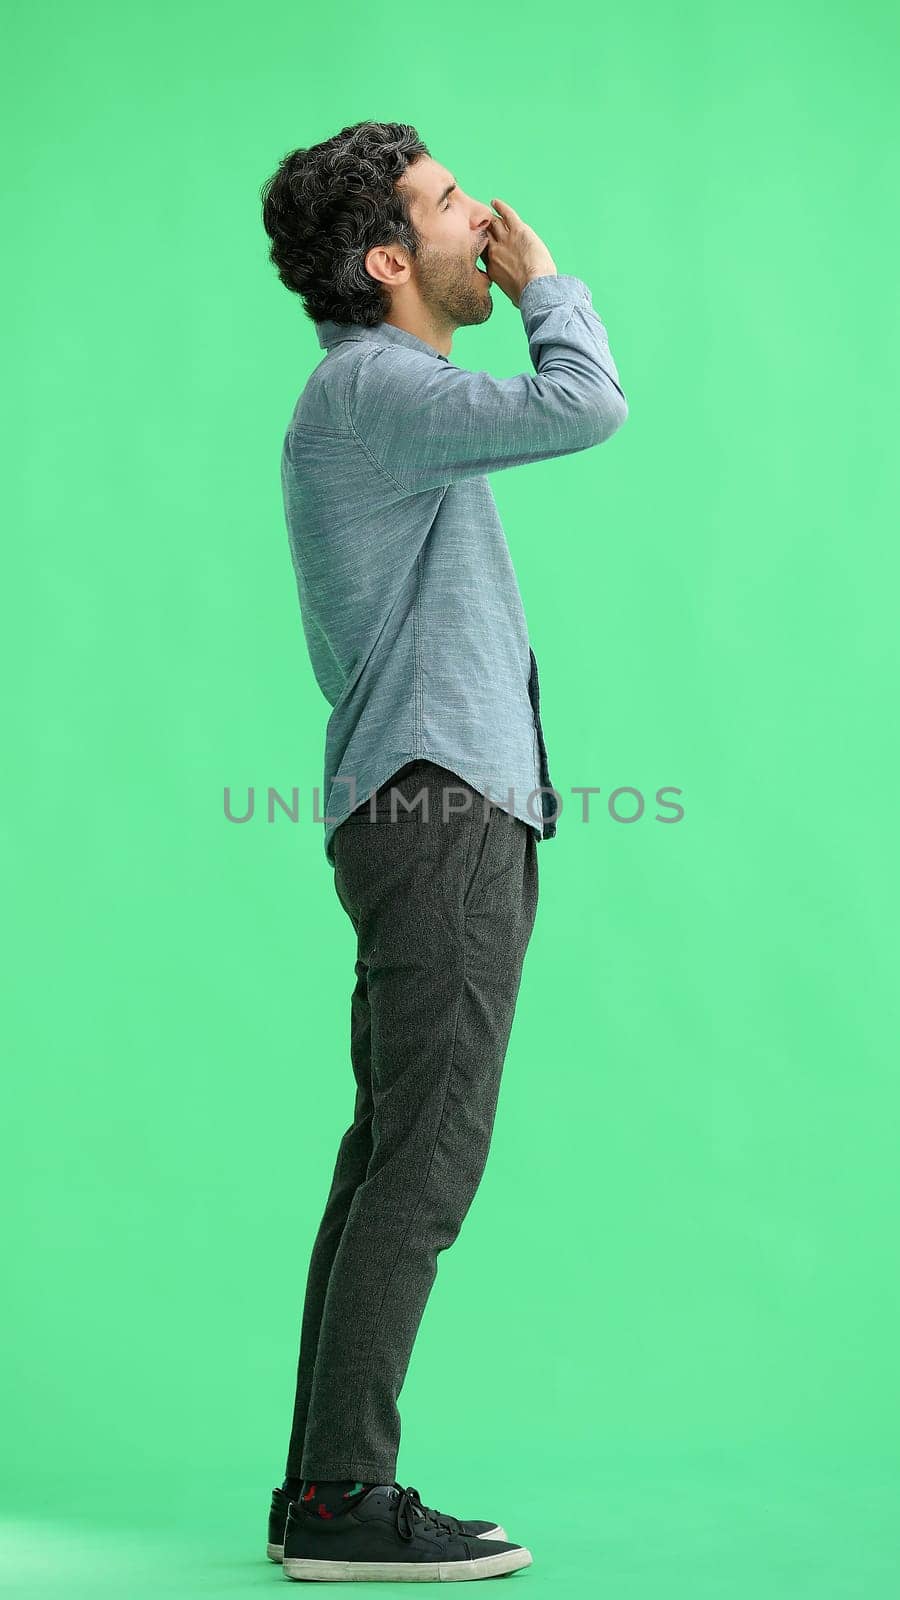 man in full growth. isolated on green background sleepy stretches.